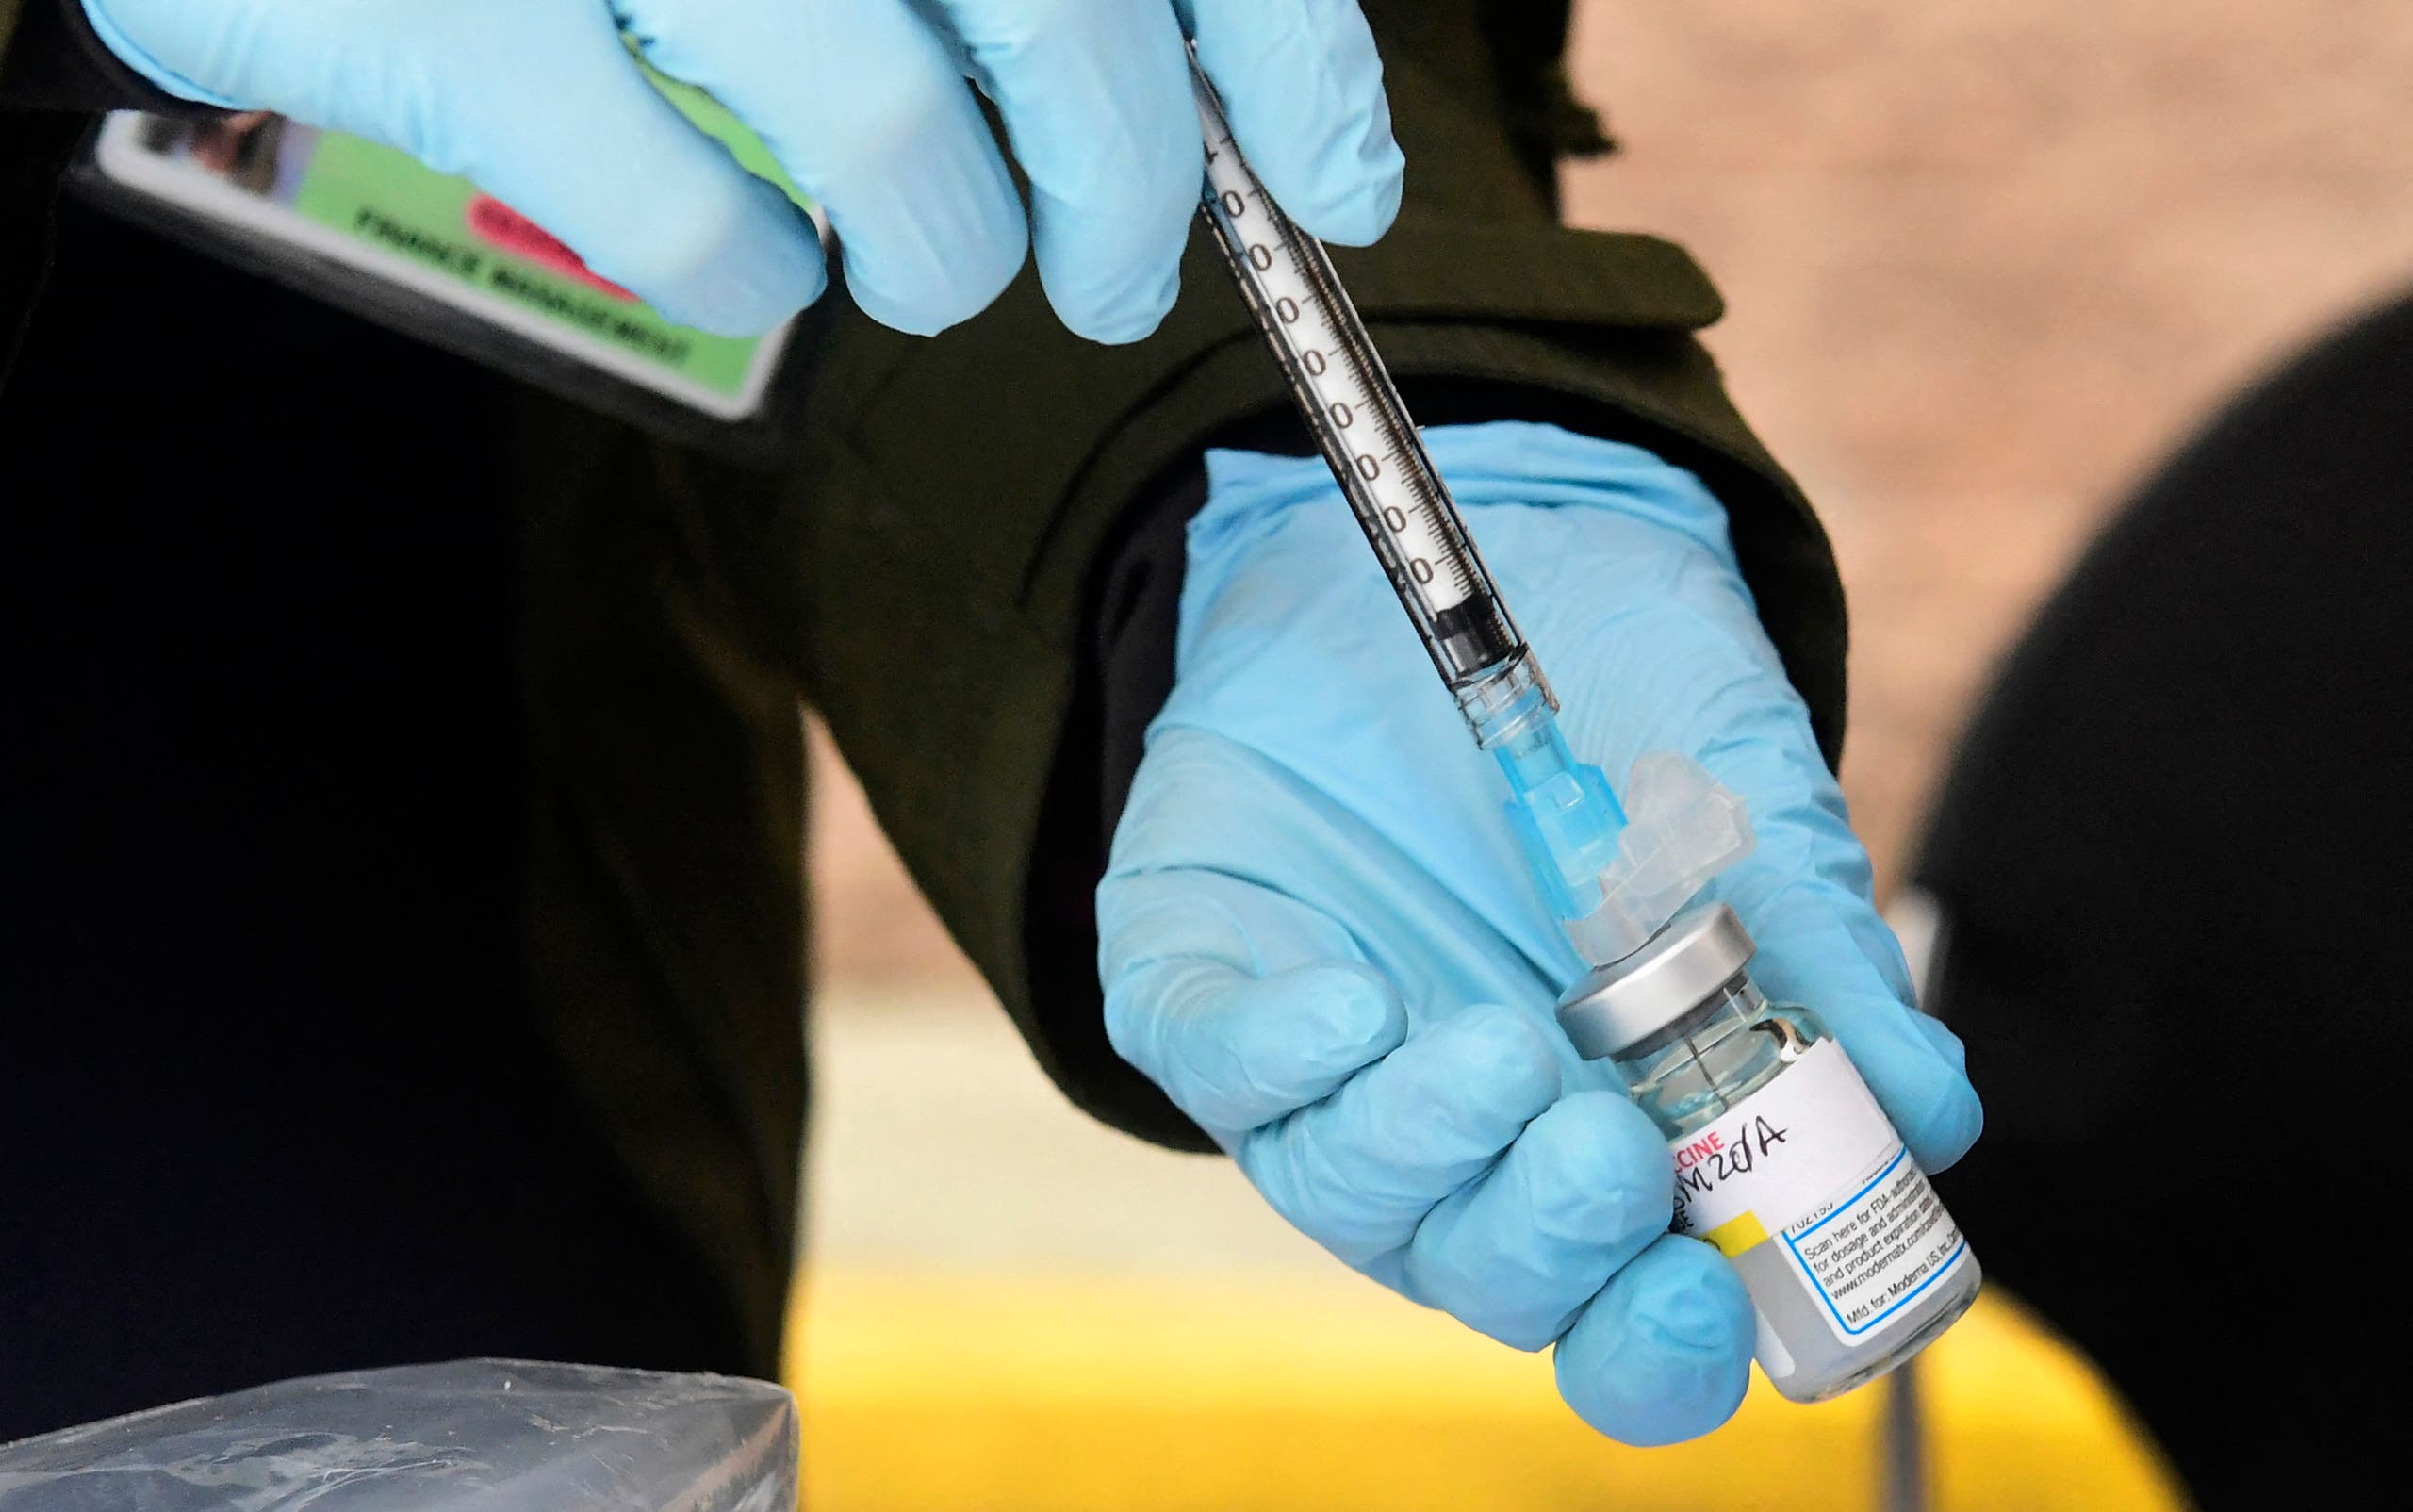 Nurse Emily Enos loads the Moderna Covid-19 vaccine into a syringe ahead of the distribution of vaccines to seniors above the age of 65 who are experiencing homelessness at the Los Angeles Mission, in the Skid Row area of Downtown Los Angeles, California on February 10, 2021. (File photo: AFP)